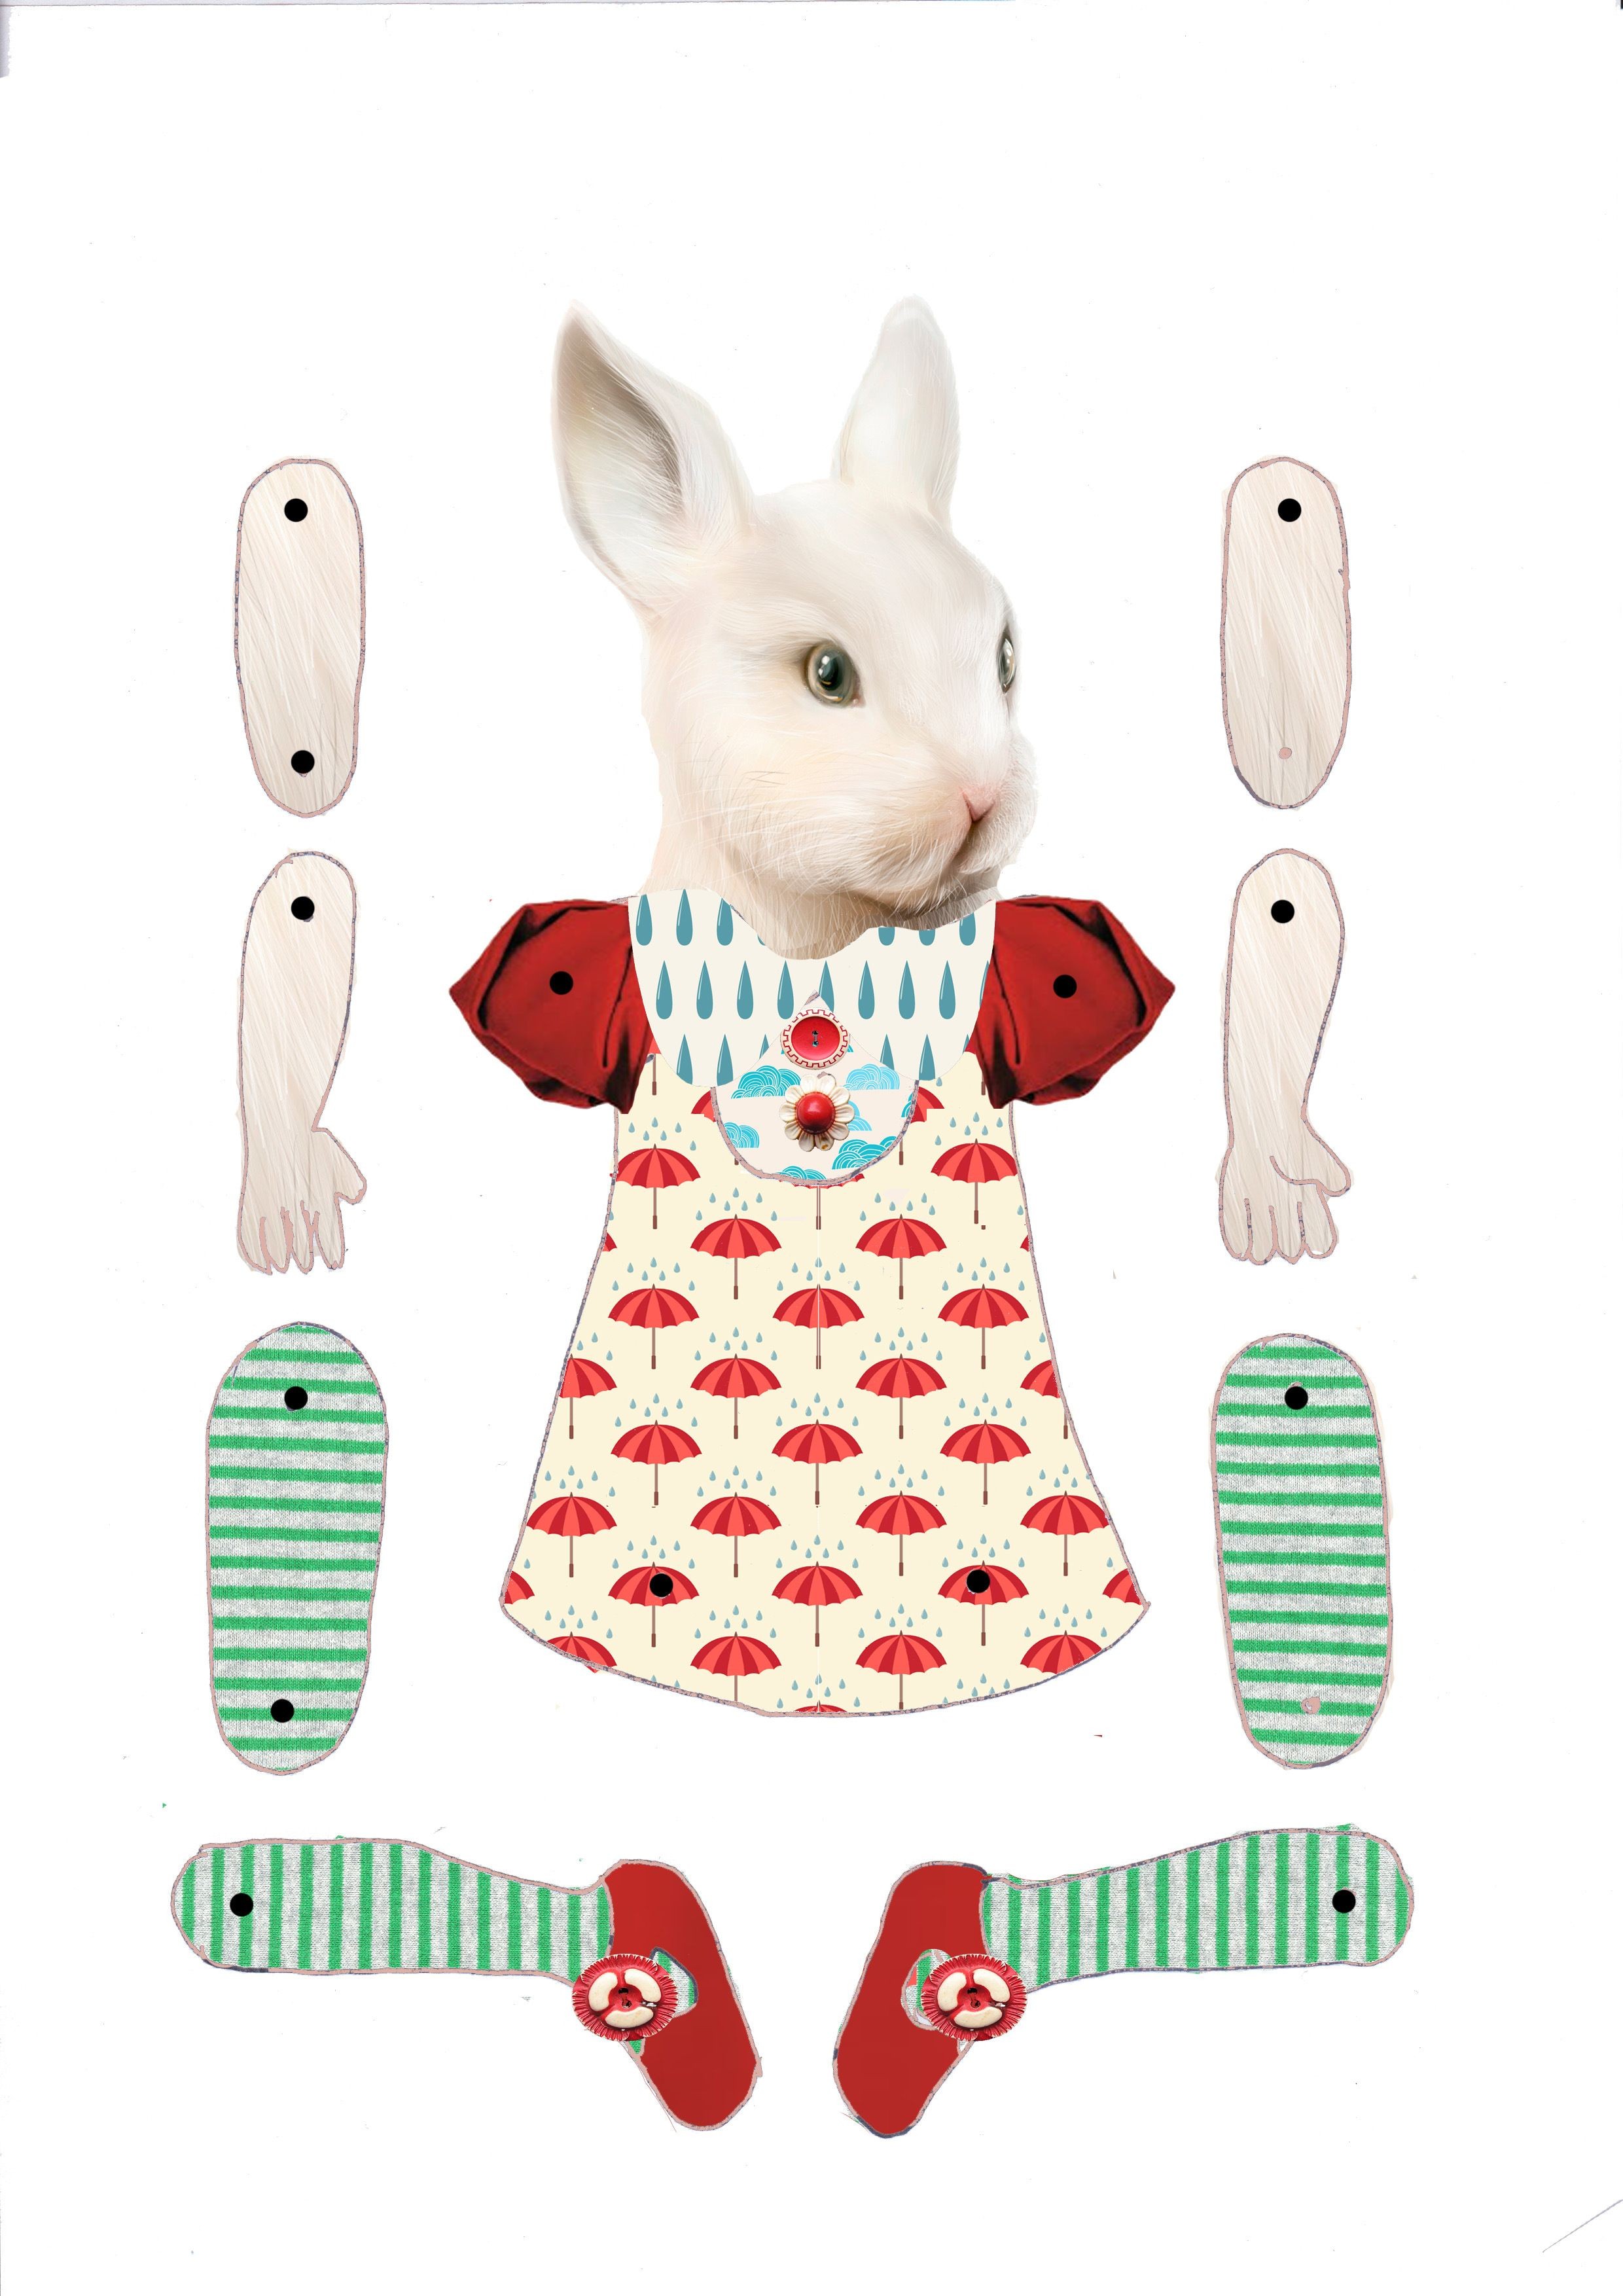 Rabbit Papercraft Jointed Paper Doll Bunny … Excellent Things I Like